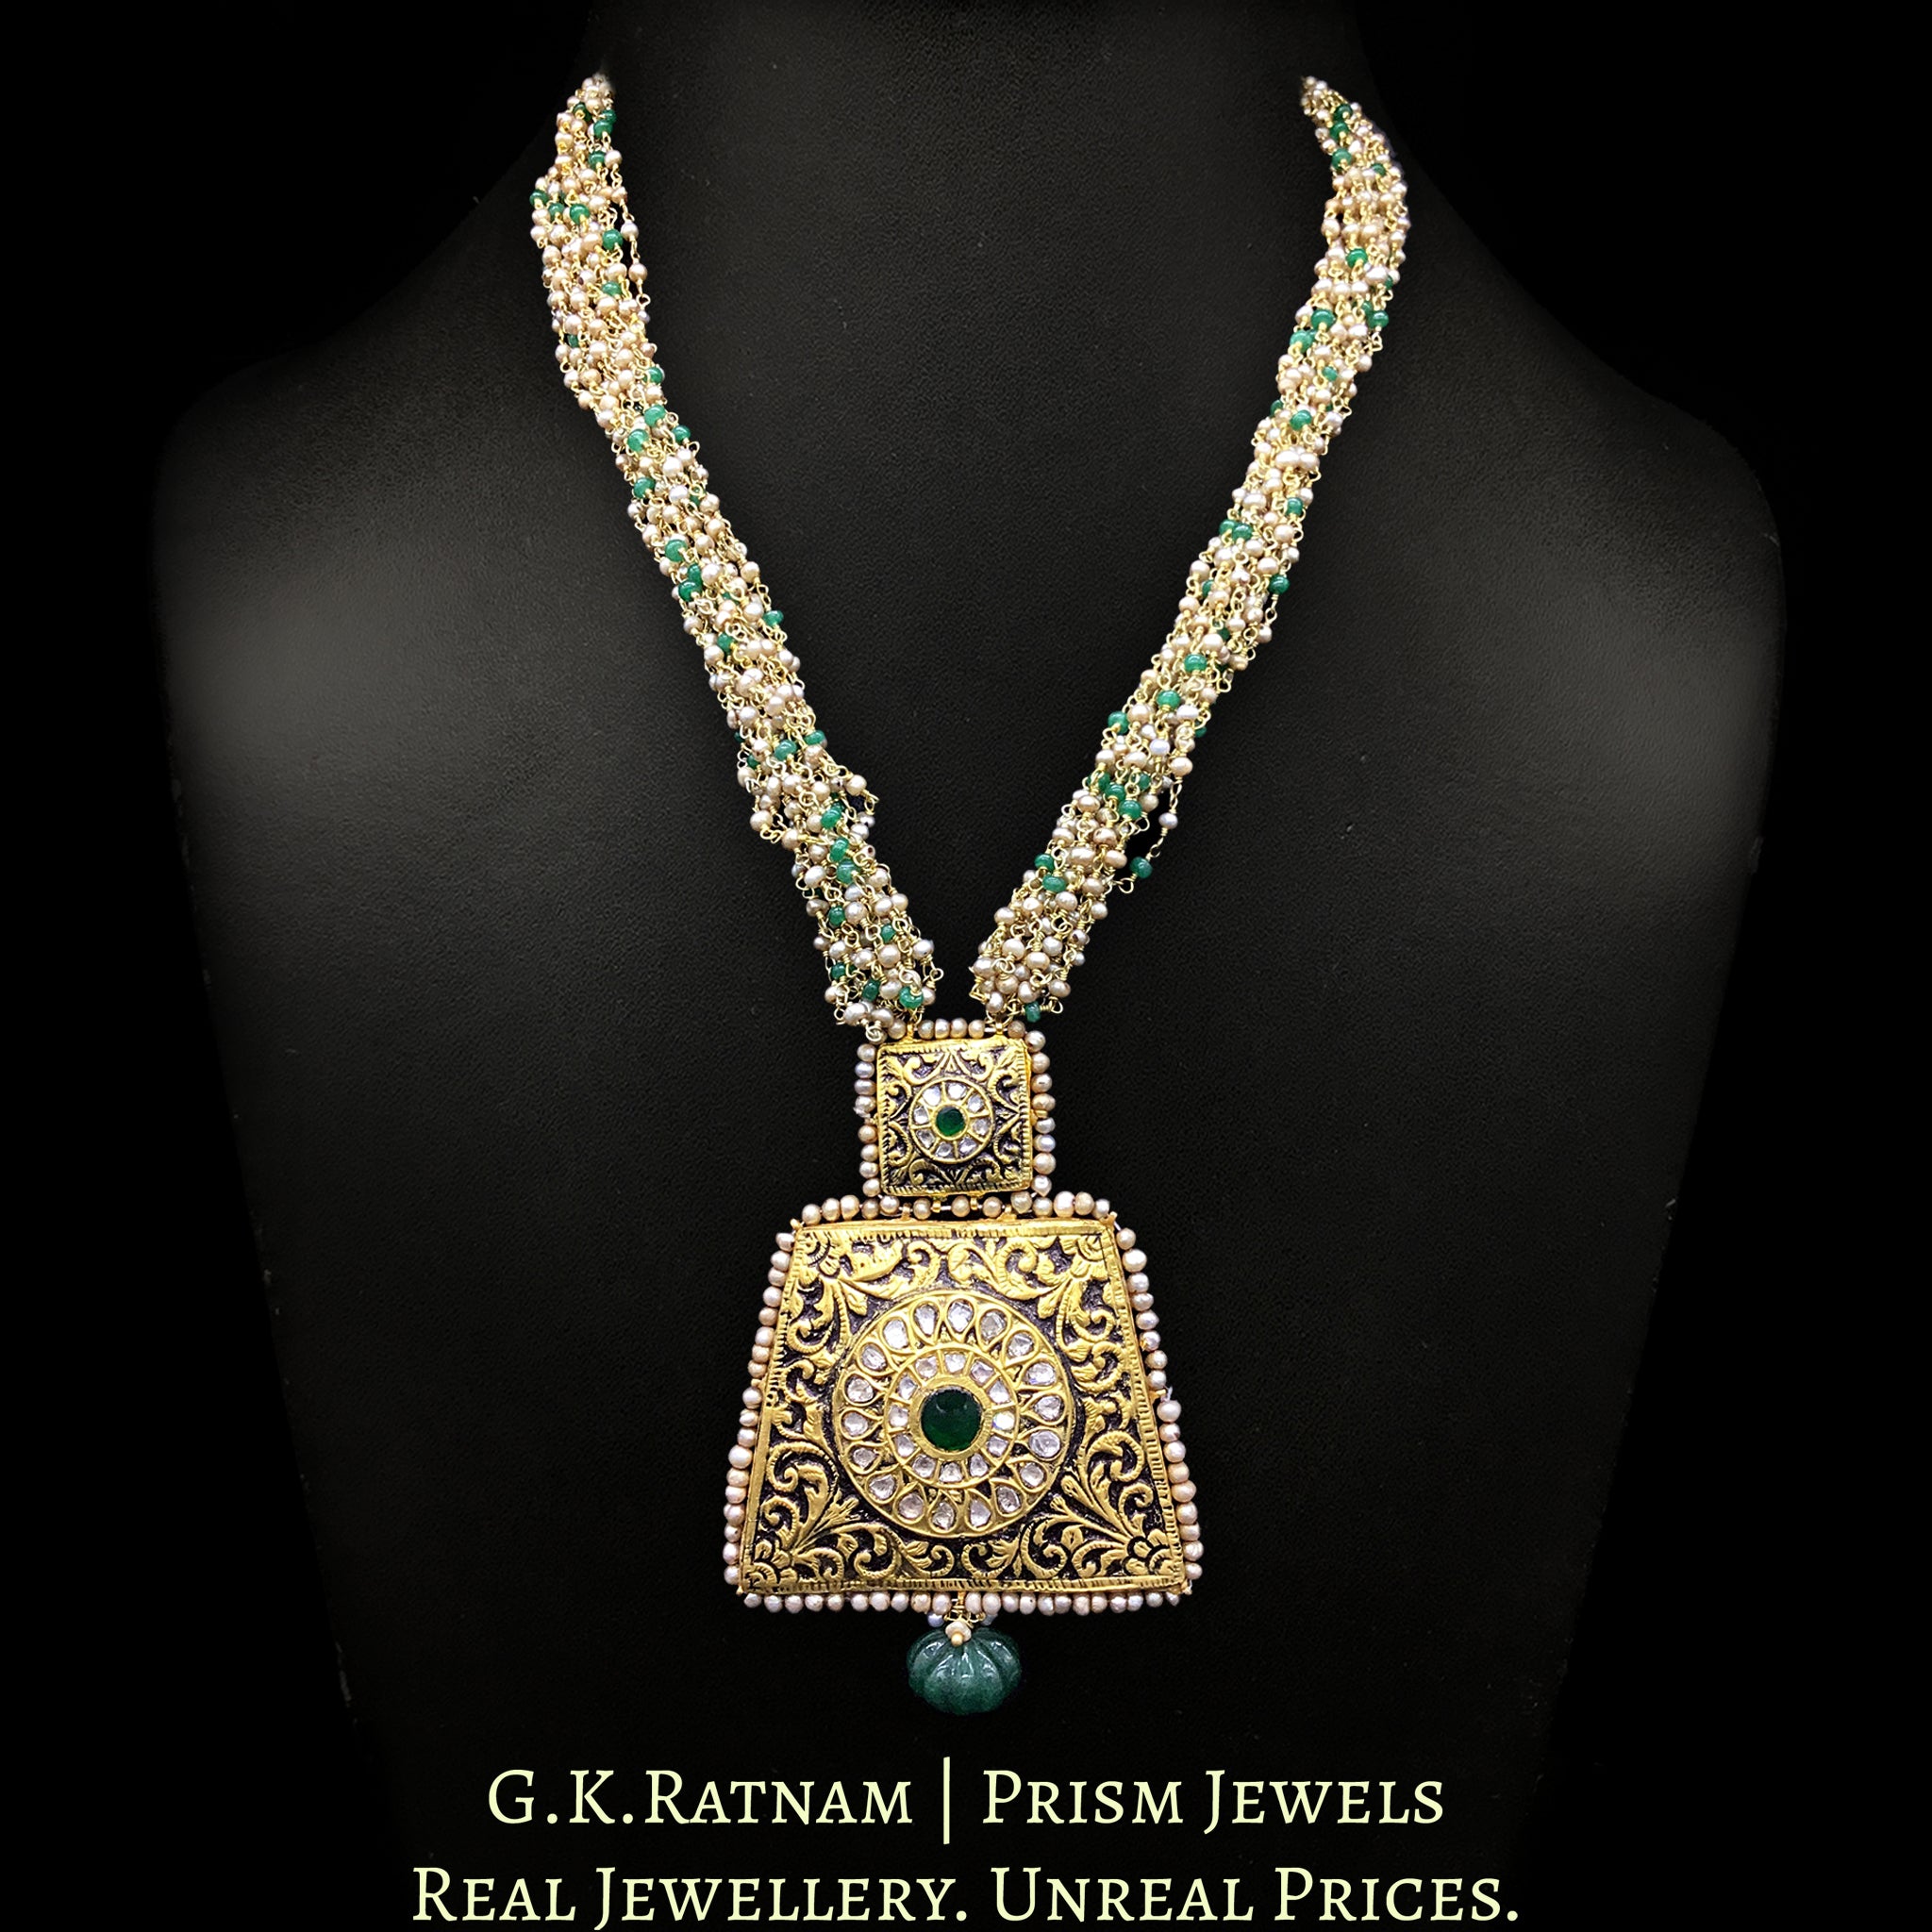 23k Gold and Diamond trapezoidal antique Pendant Set with freshwater pearls and green beryls in chain clusters